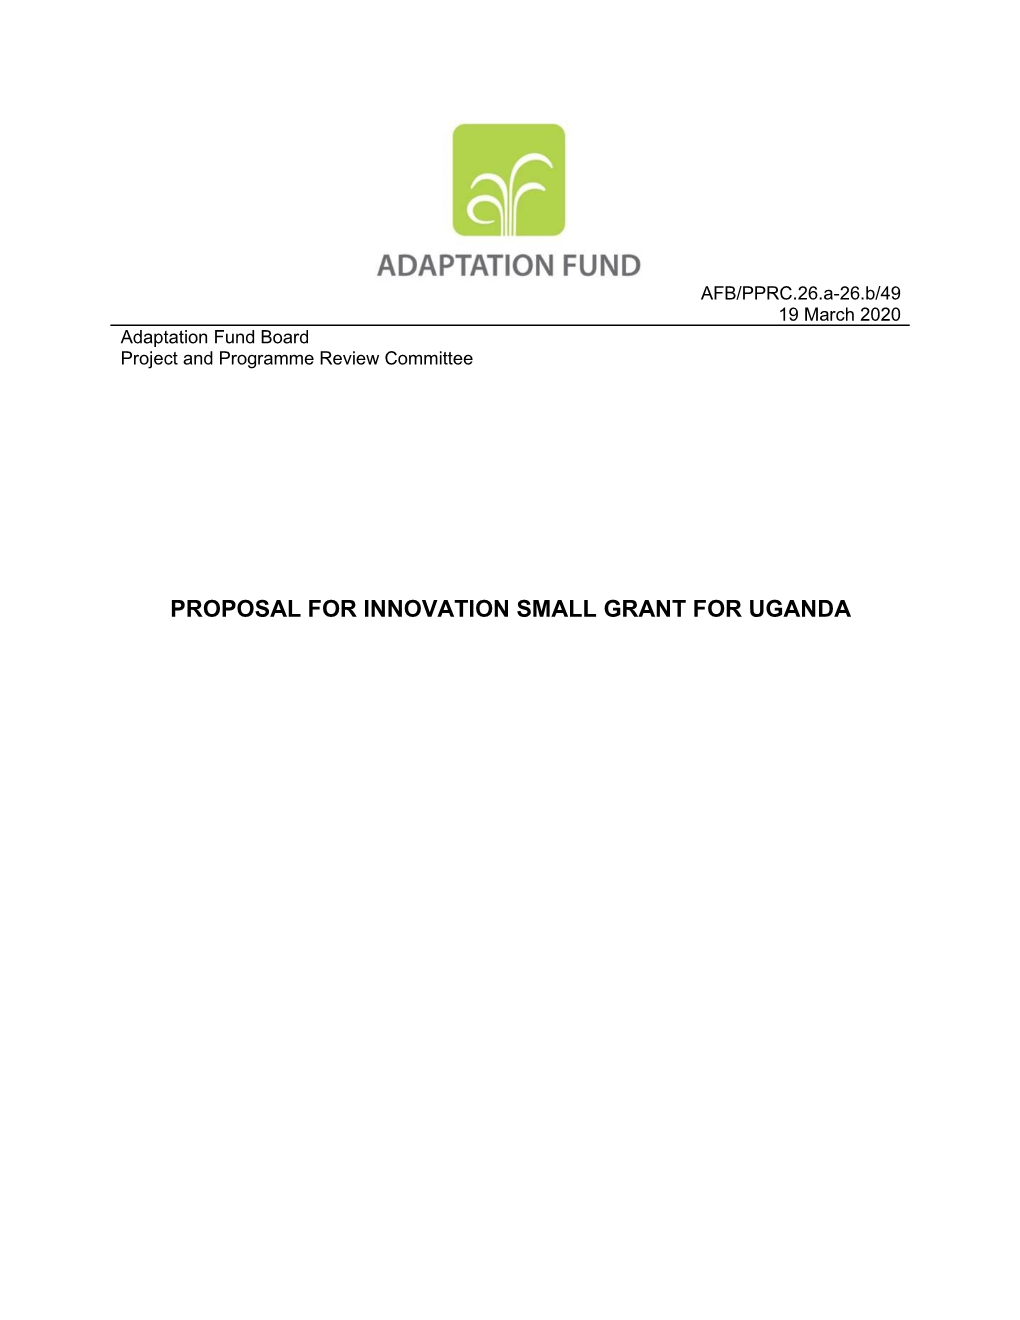 Proposal for Innovation Small Grant for Uganda